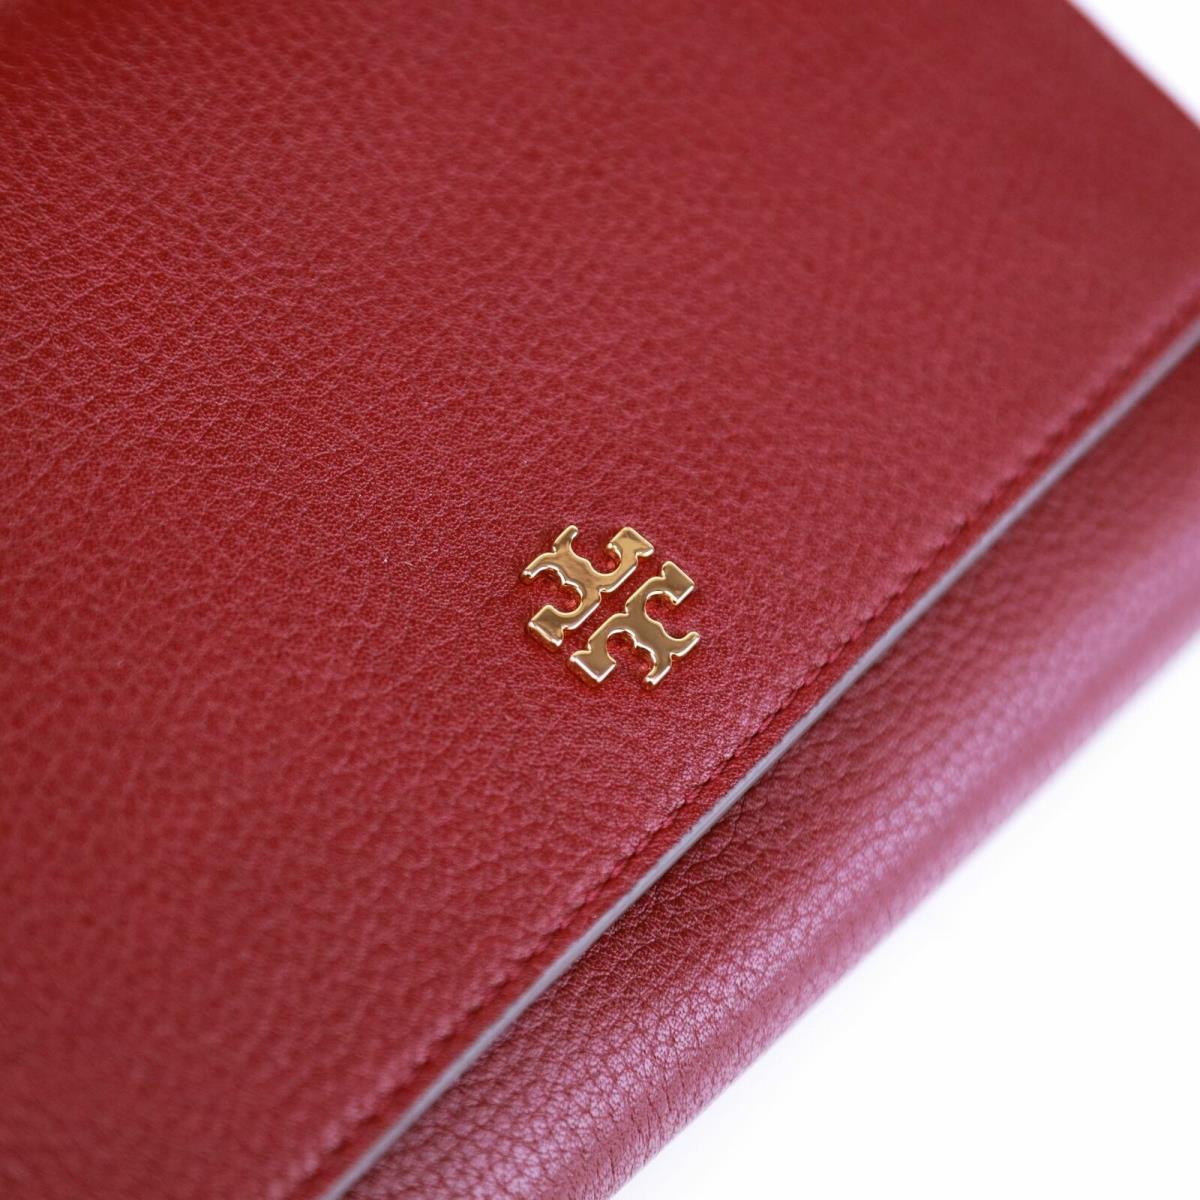 Tory Burch Leather Chain Wallet Crossbody Bag in Dark Red - Tory Burch bag  - 192485336580 | Fash Brands